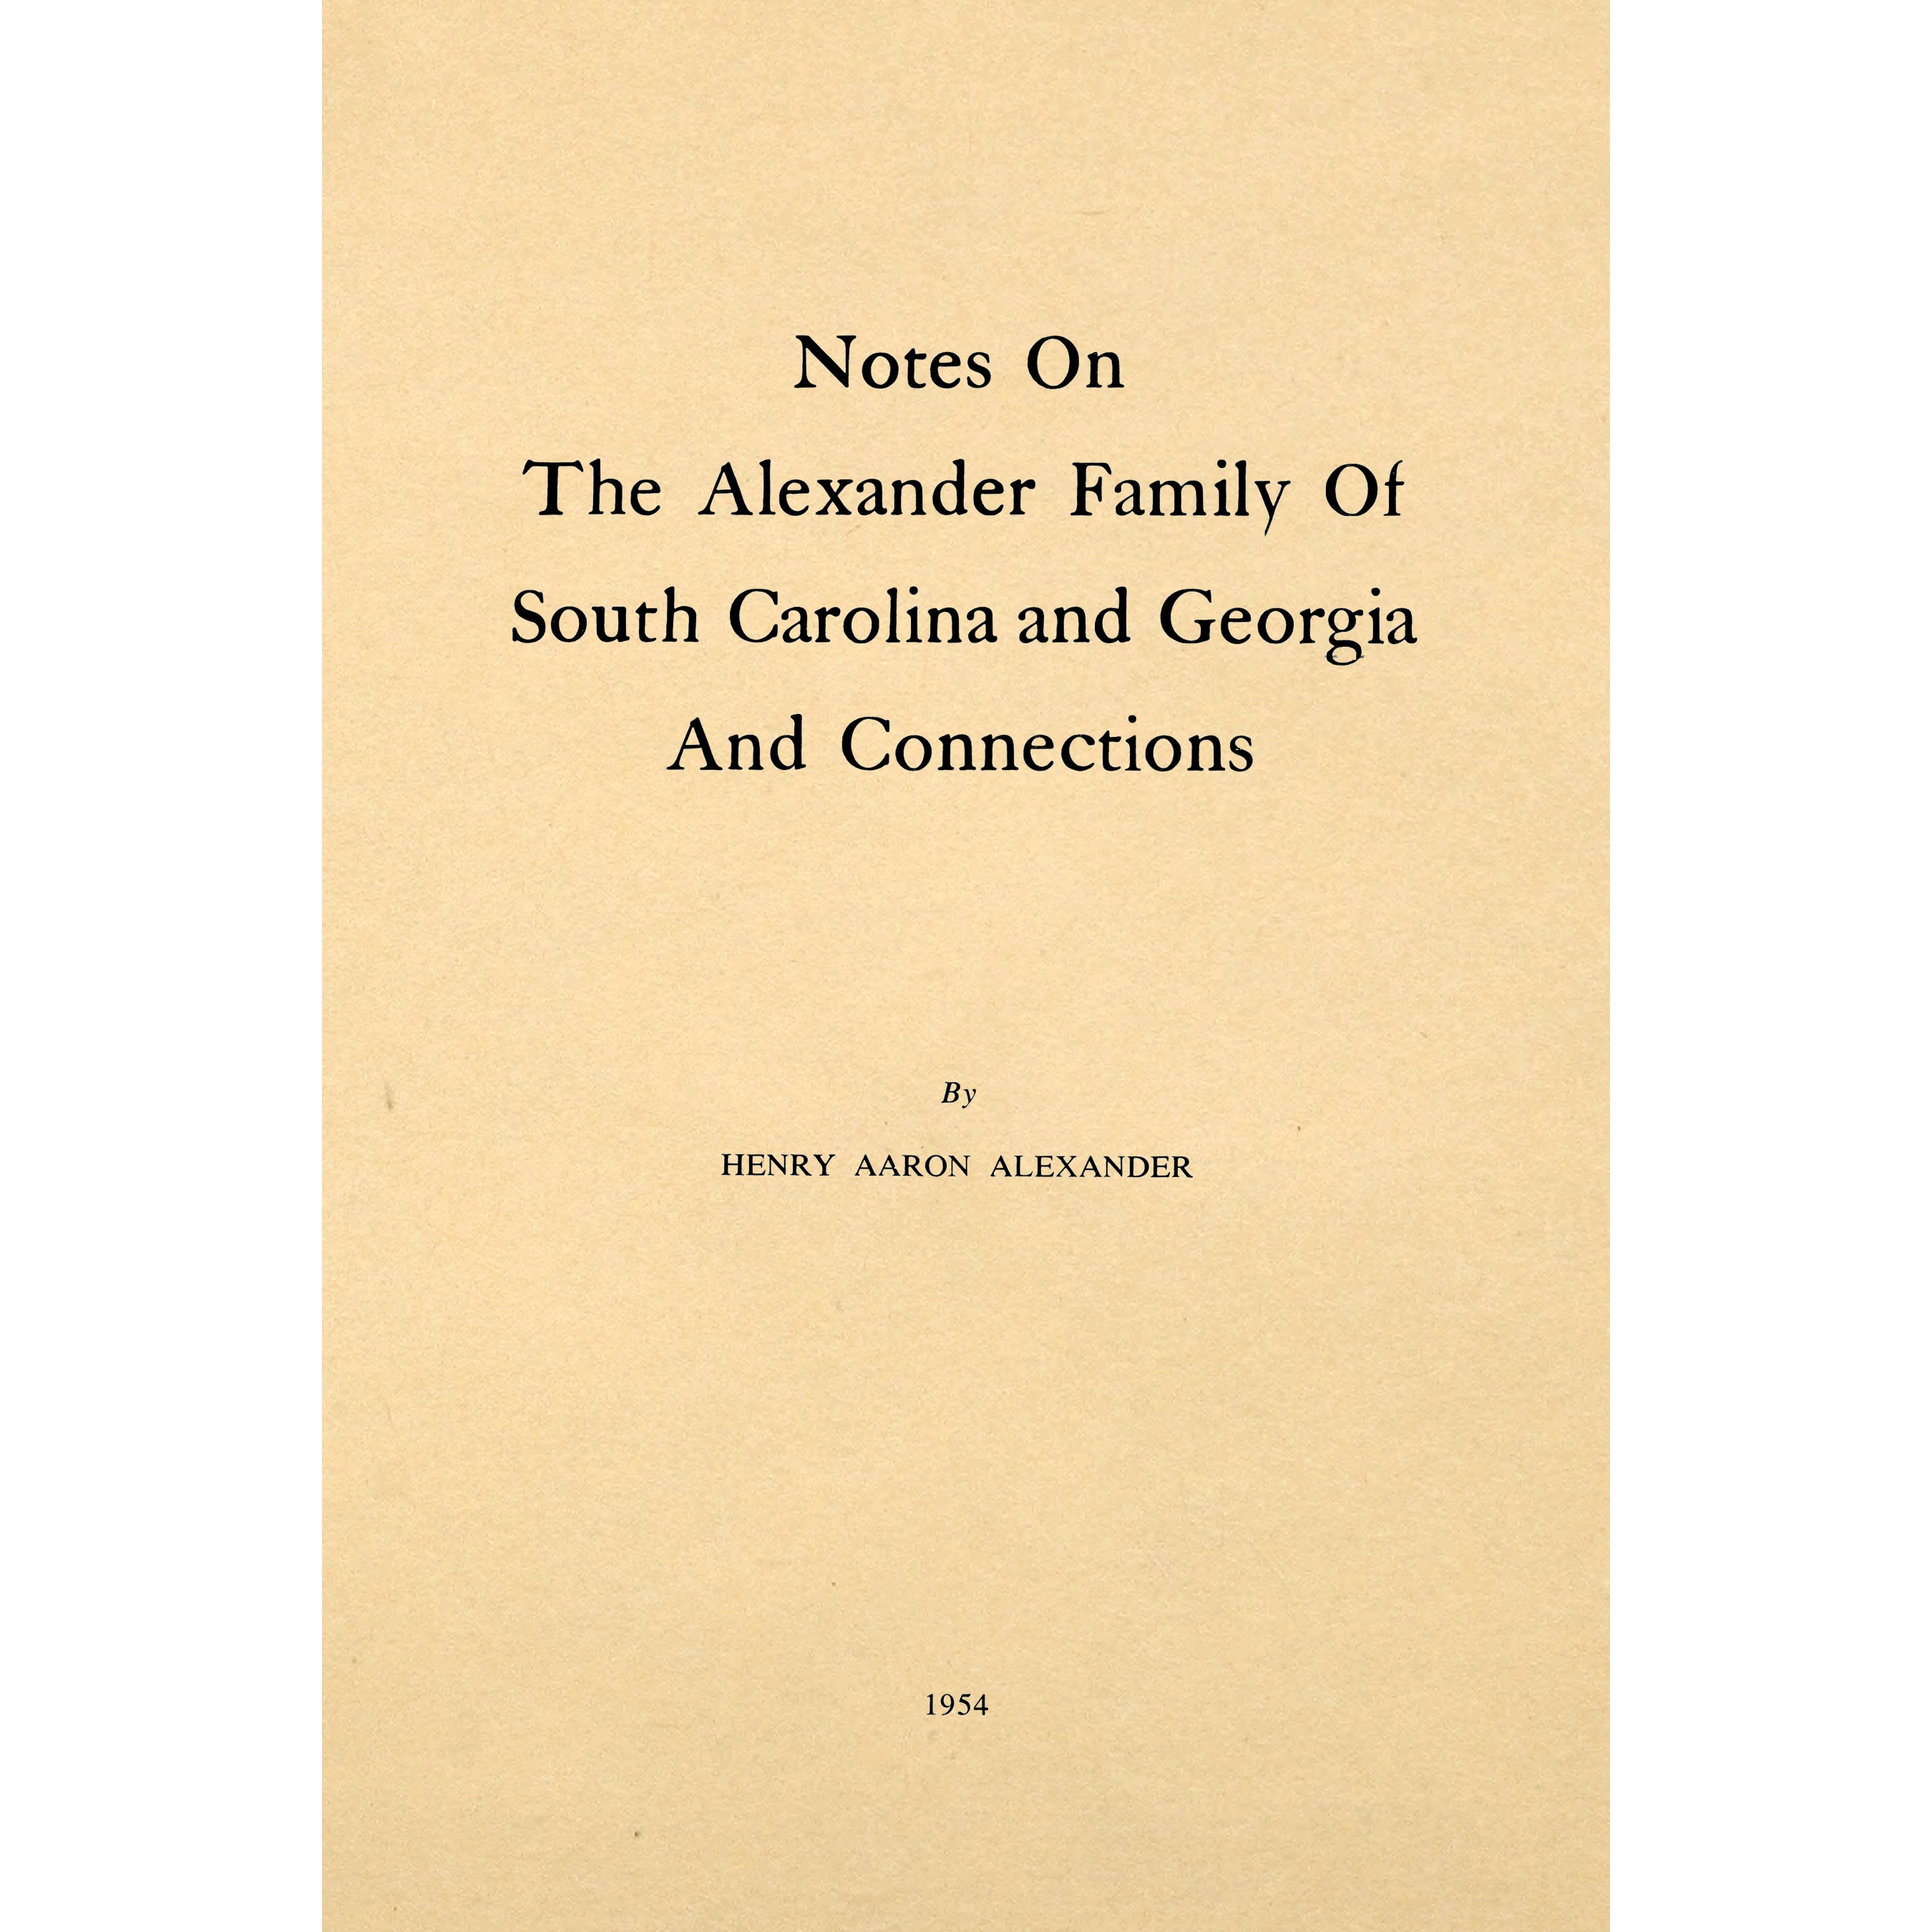 Notes on the Alexander family of South Carolina and Georgia, and connections